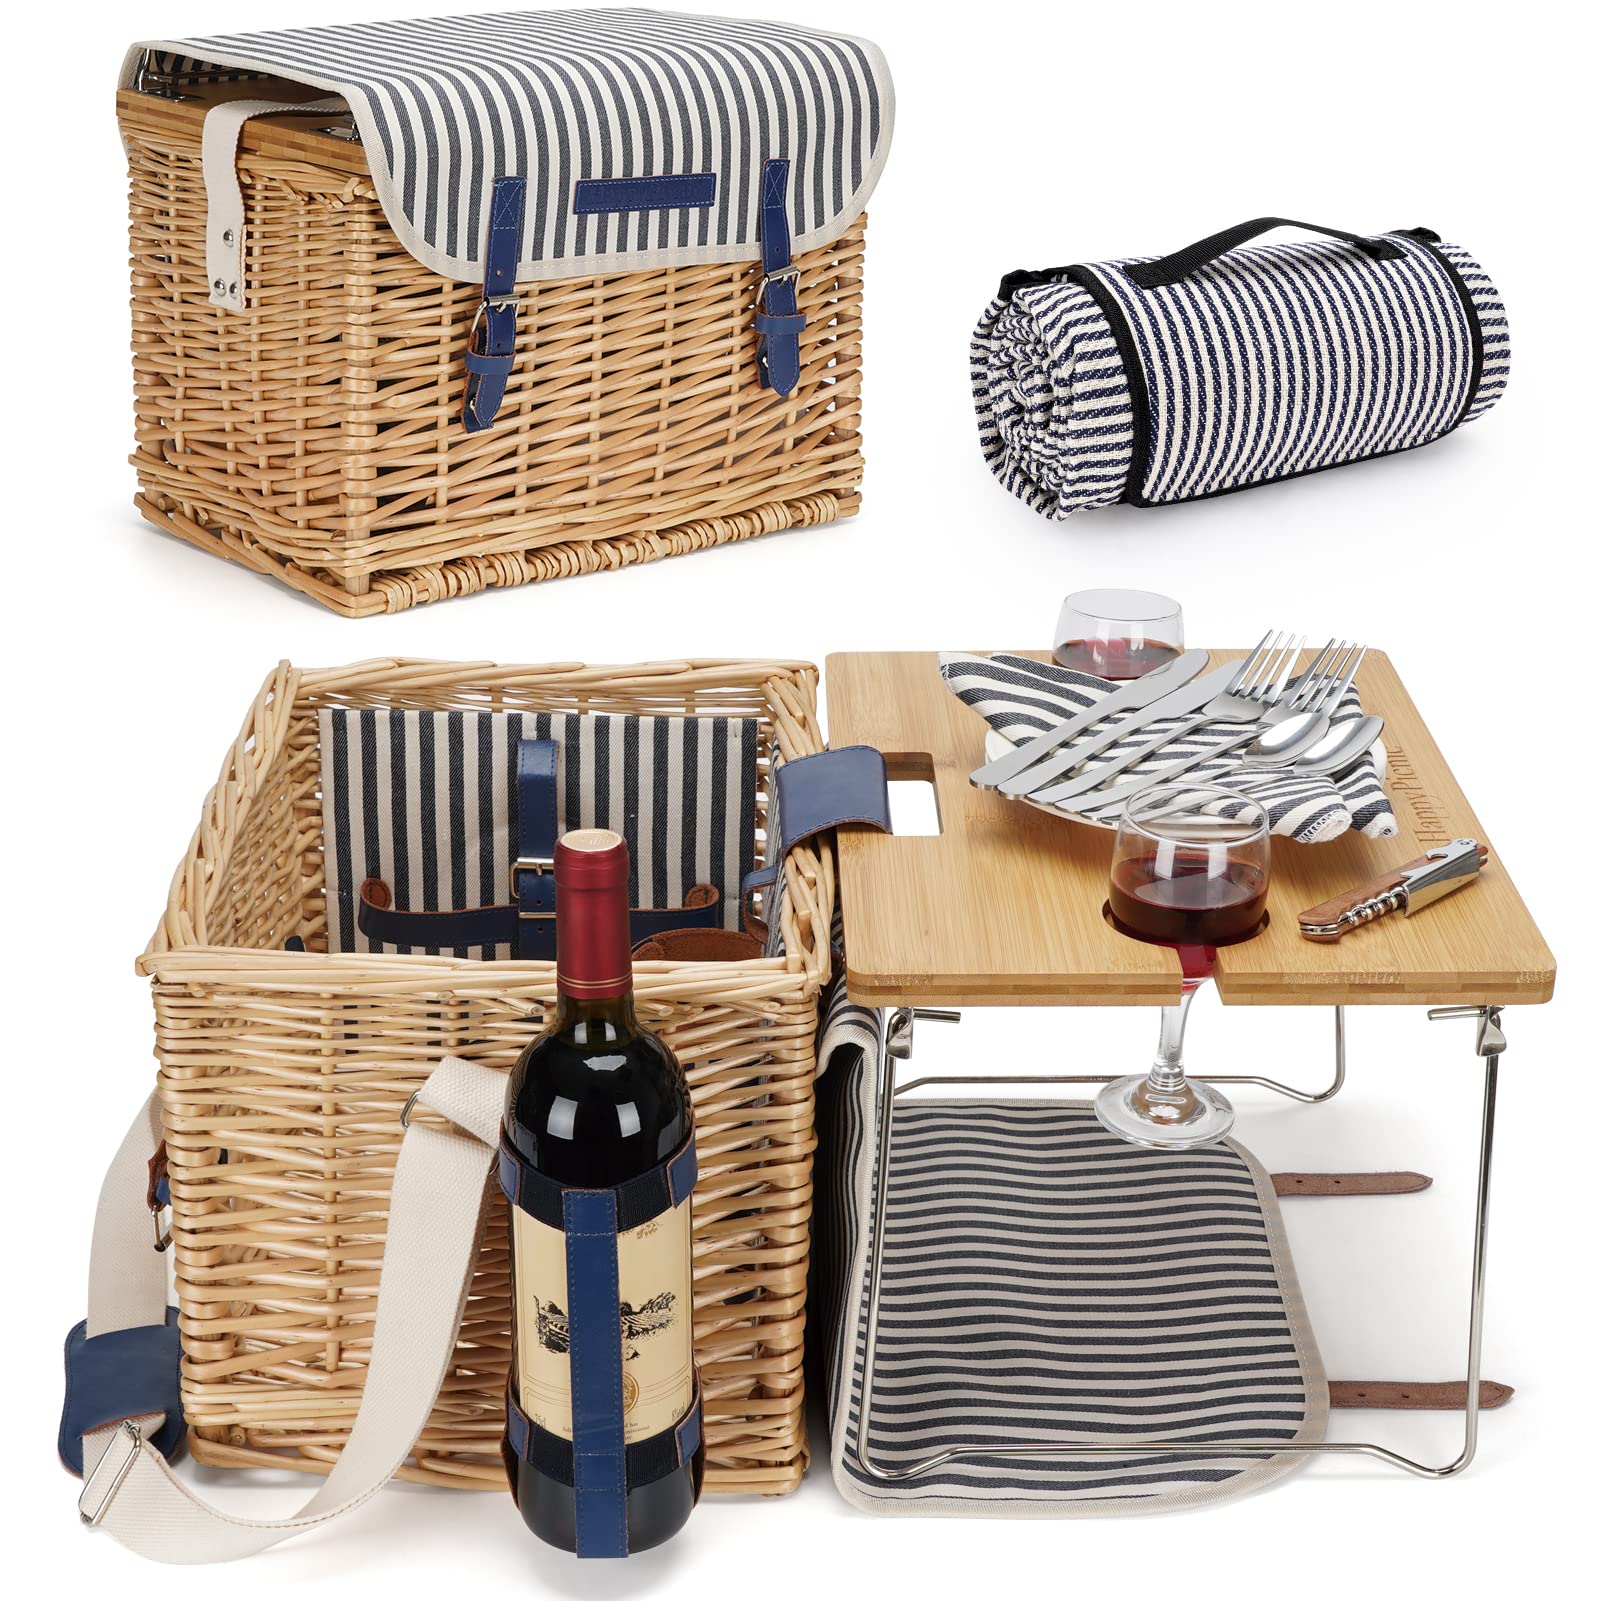 Wicker Picnic Basket for 2, 2 Person Picnic Set, Willow Hamper Service Gift Set with Bamboo Wine Table with Metal Legs for Camping and Outdoor Party